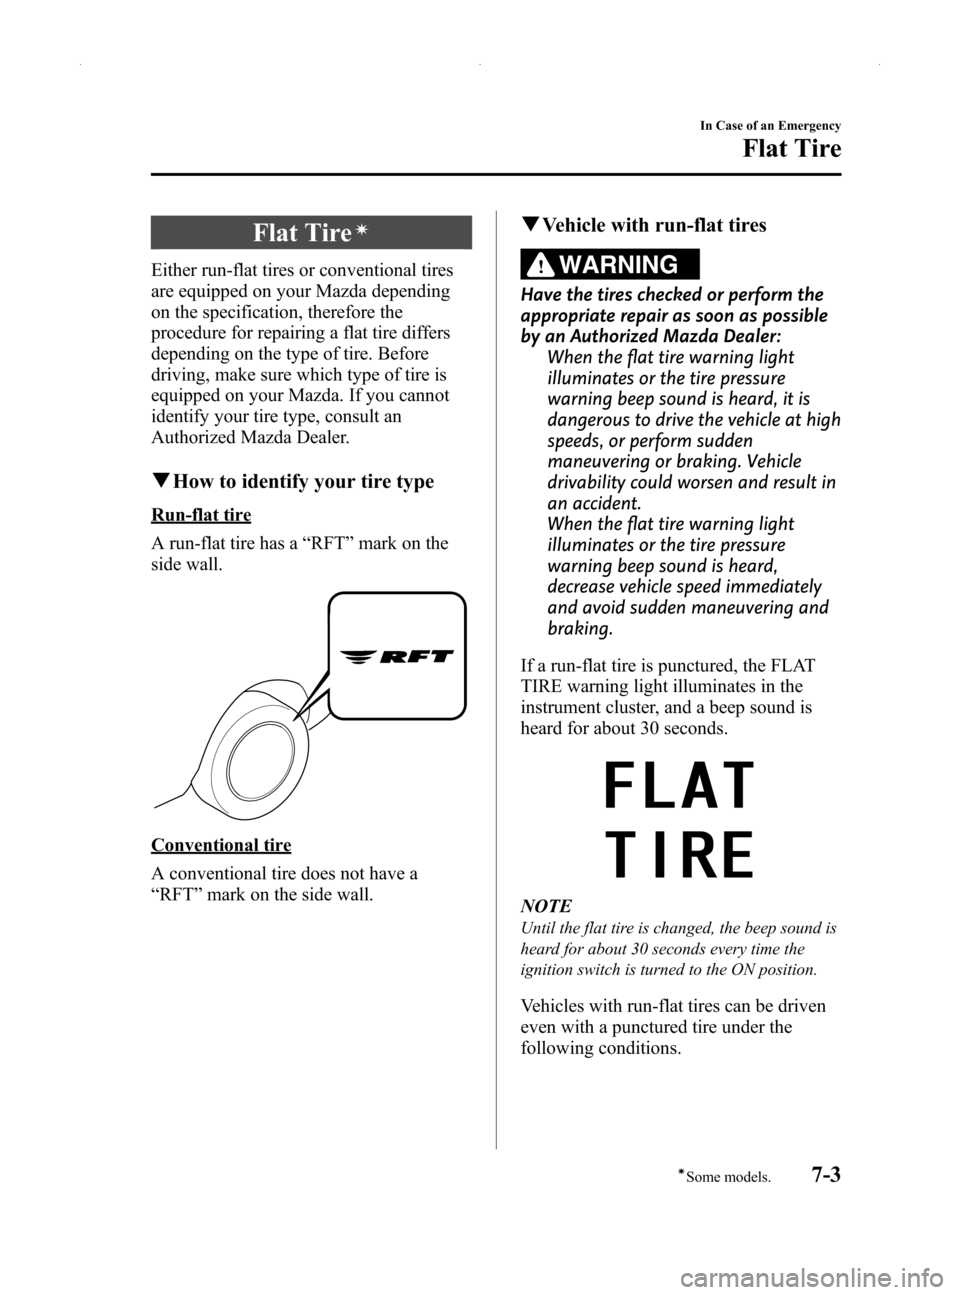 MAZDA MODEL MX-5 2014  Owners Manual (in English) Black plate (303,1)
Flat Tireí
Either run-flat tires or conventional tires
are equipped on your Mazda depending
on the specification, therefore the
procedure for repairing a flat tire differs
dependi